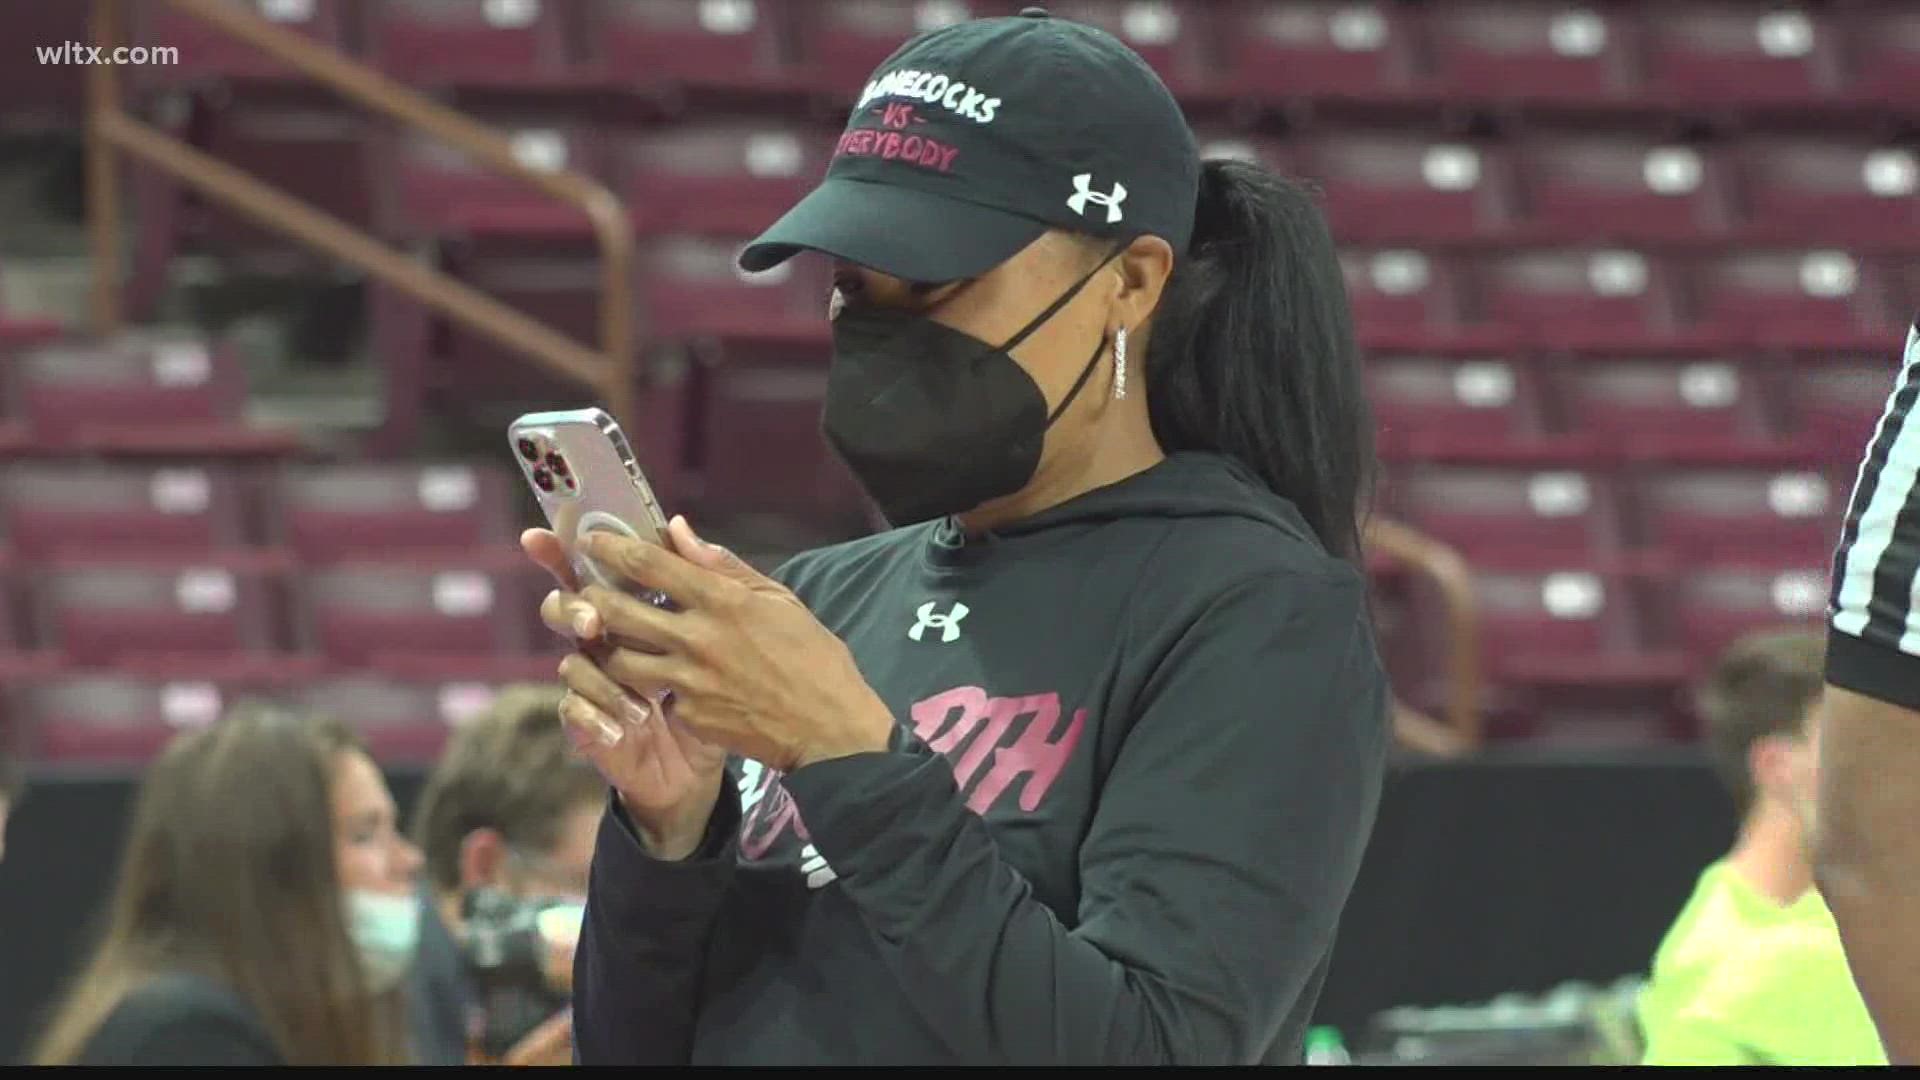 Dawn Staley signs $22.4 million extension at South Carolina - The Next